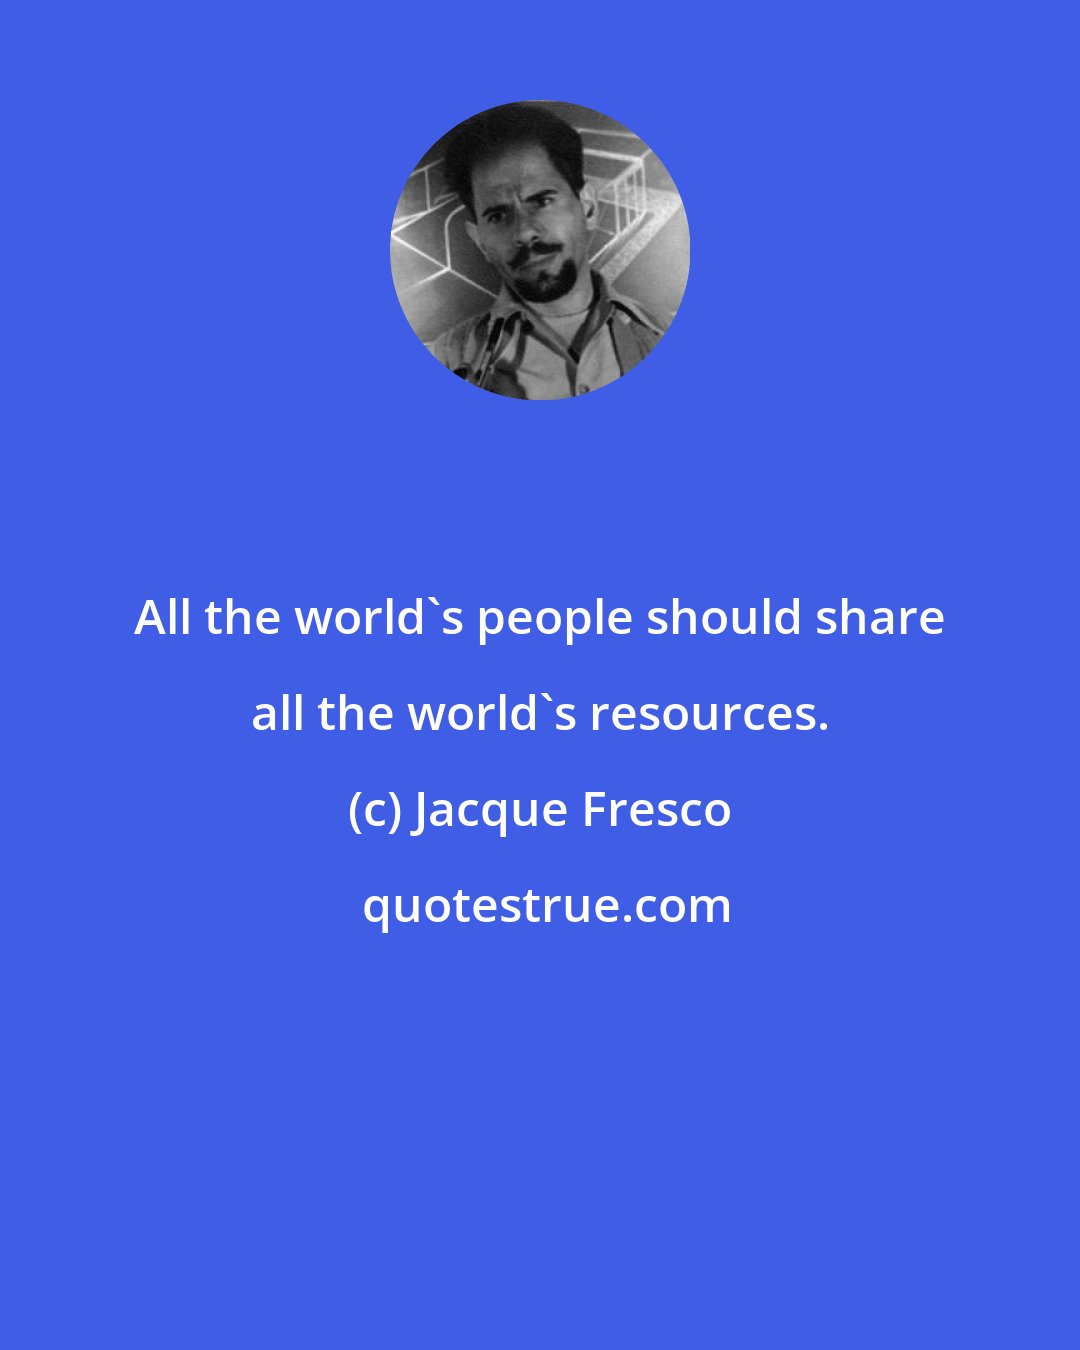 Jacque Fresco: All the world's people should share all the world's resources.